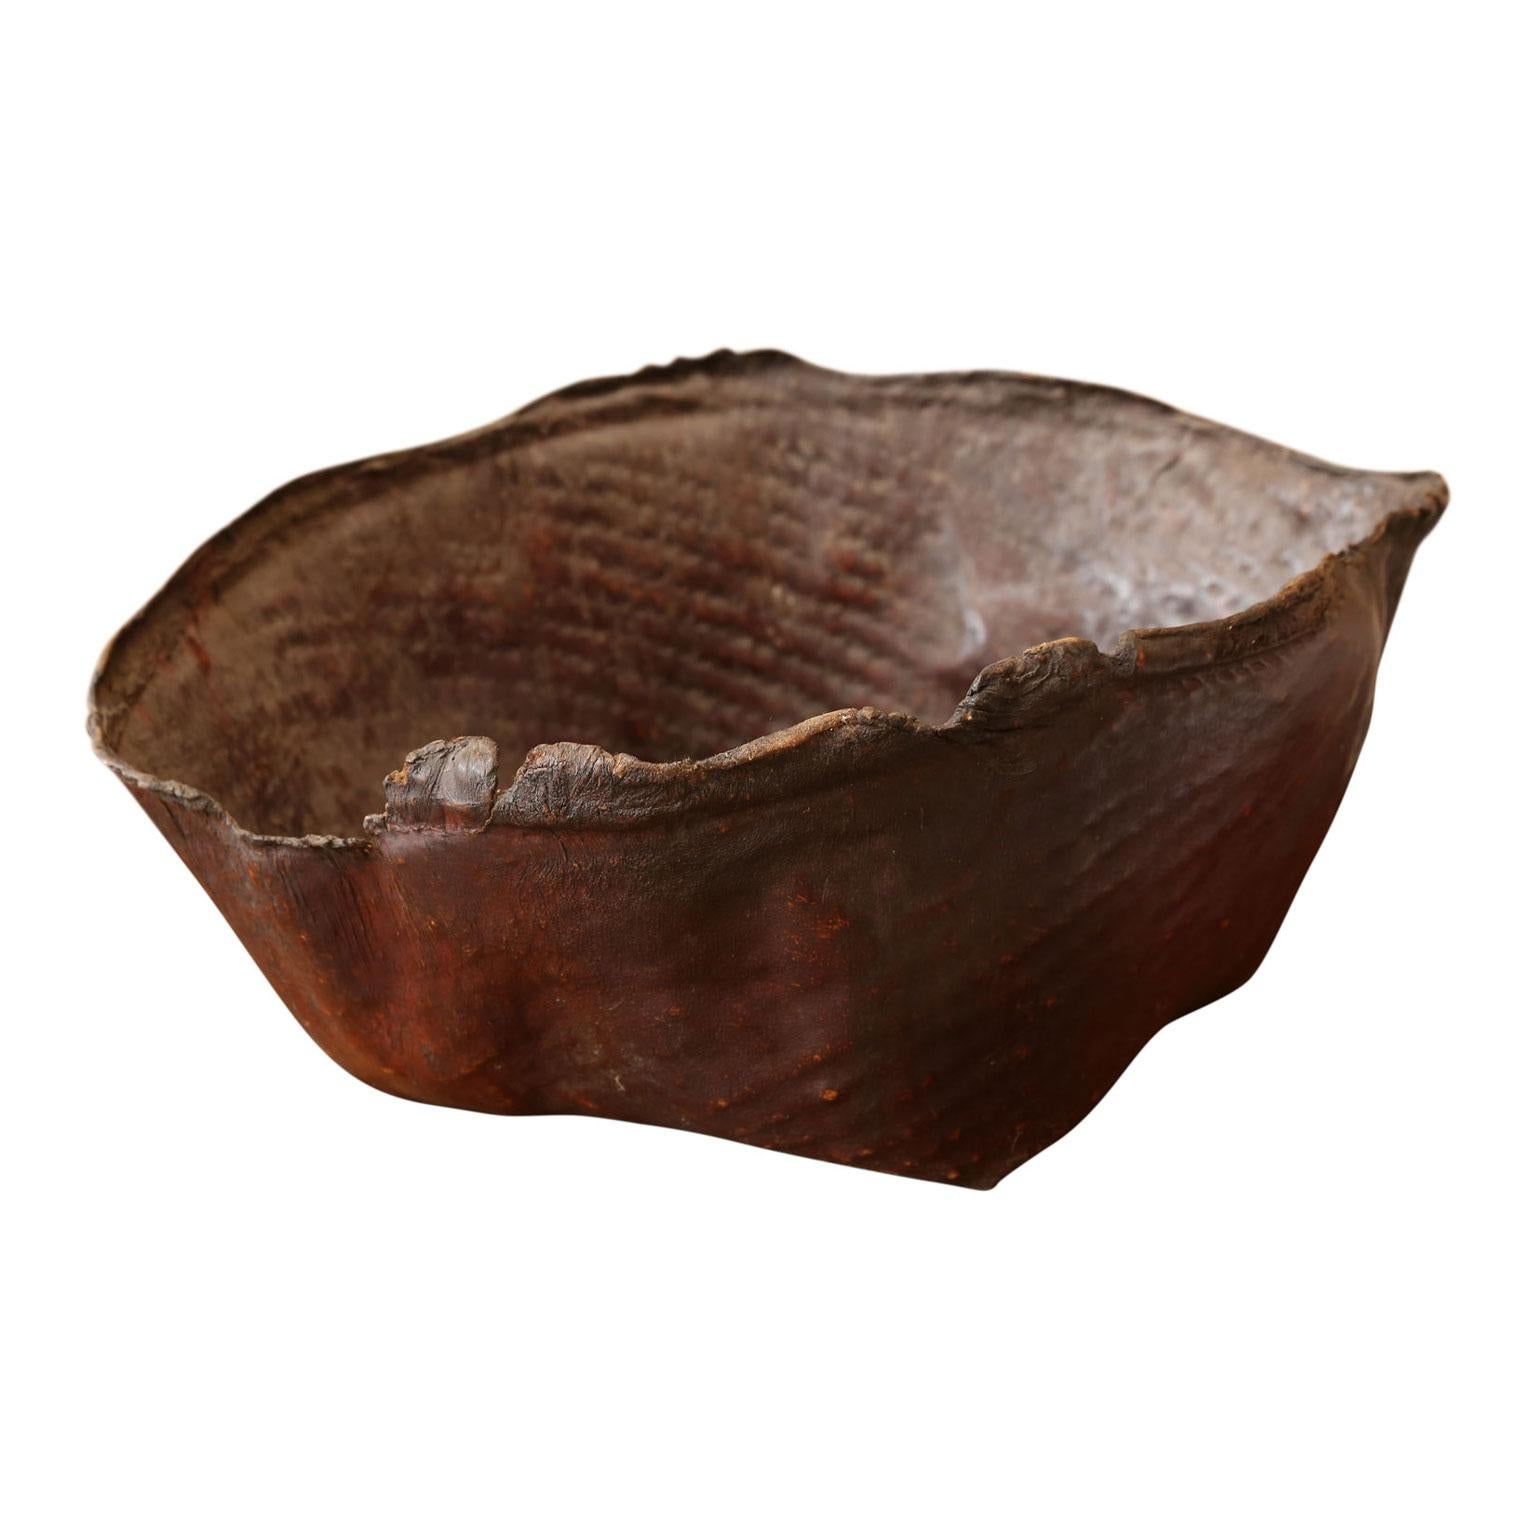 Large primitive hide basket: frayed natural edge, organic-shaped basket of hardened leather. Beautiful espresso-brown color and patina. Makes an excellent near-pair with item ref. LU984713373121 (pictured together in last image).